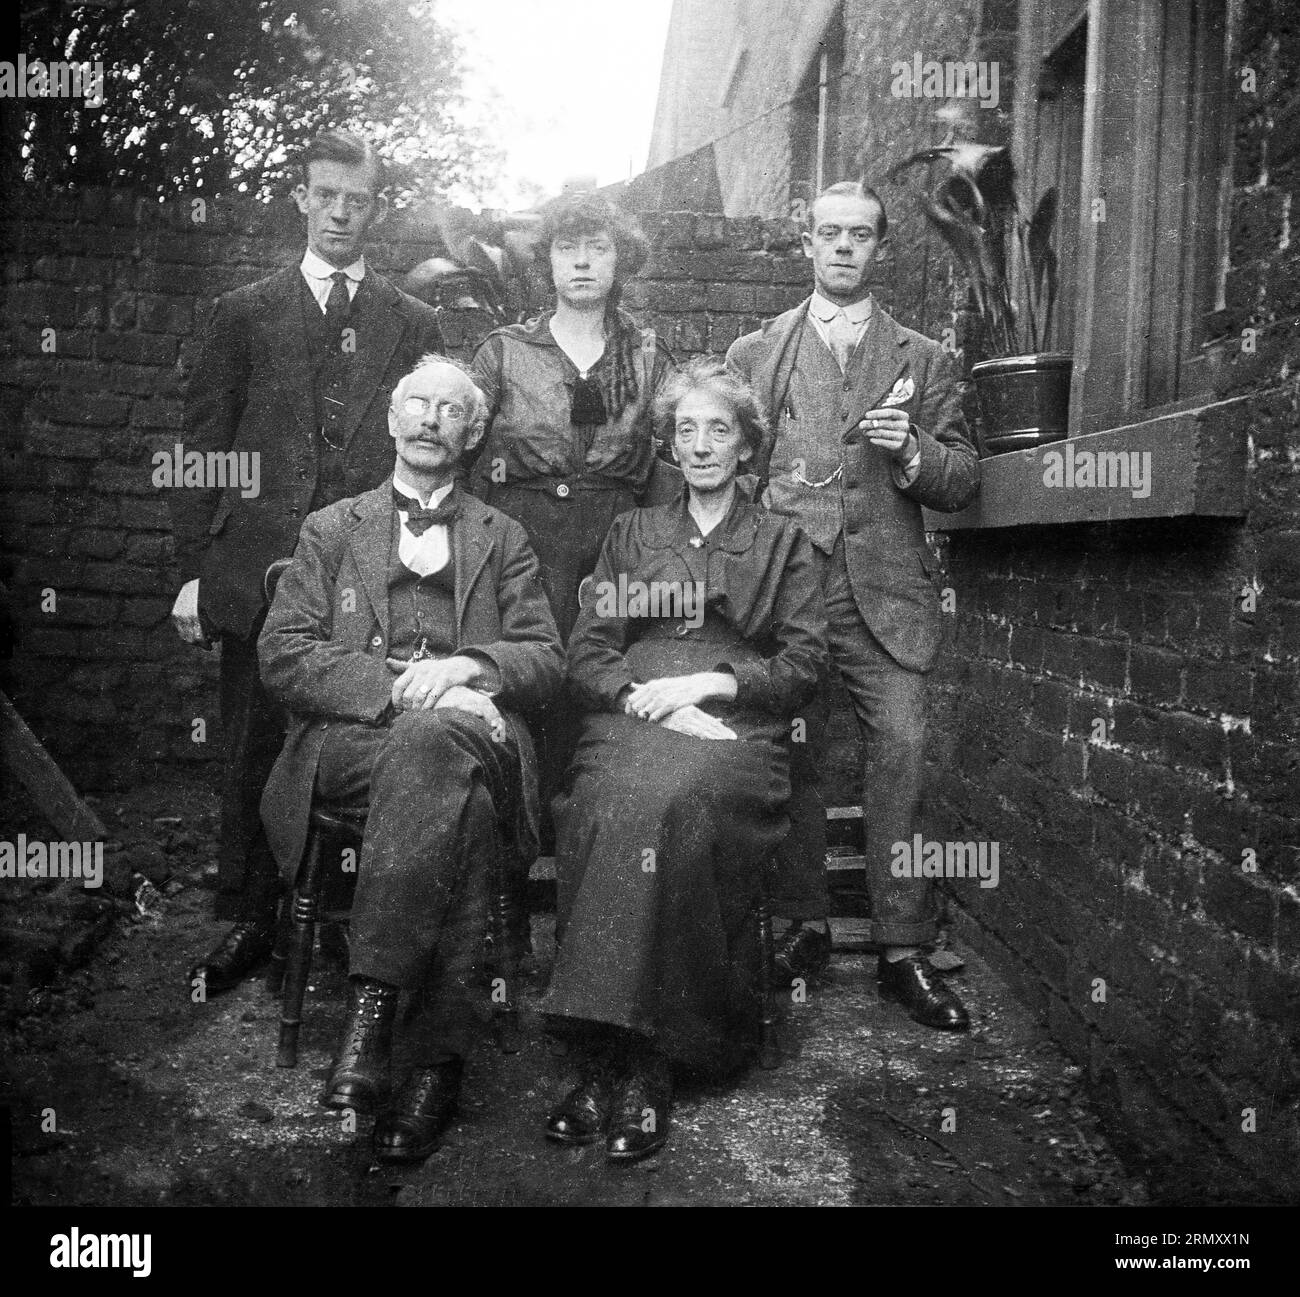 1930s, historical, a family photo outside in an alley of a victorian house, England, UK. The men and ladies are wearing the formal clothes of the era, including gold chains, stiff collar and laced up over ankle boots worn by the elderly gentleman sitting at the front. Stock Photo